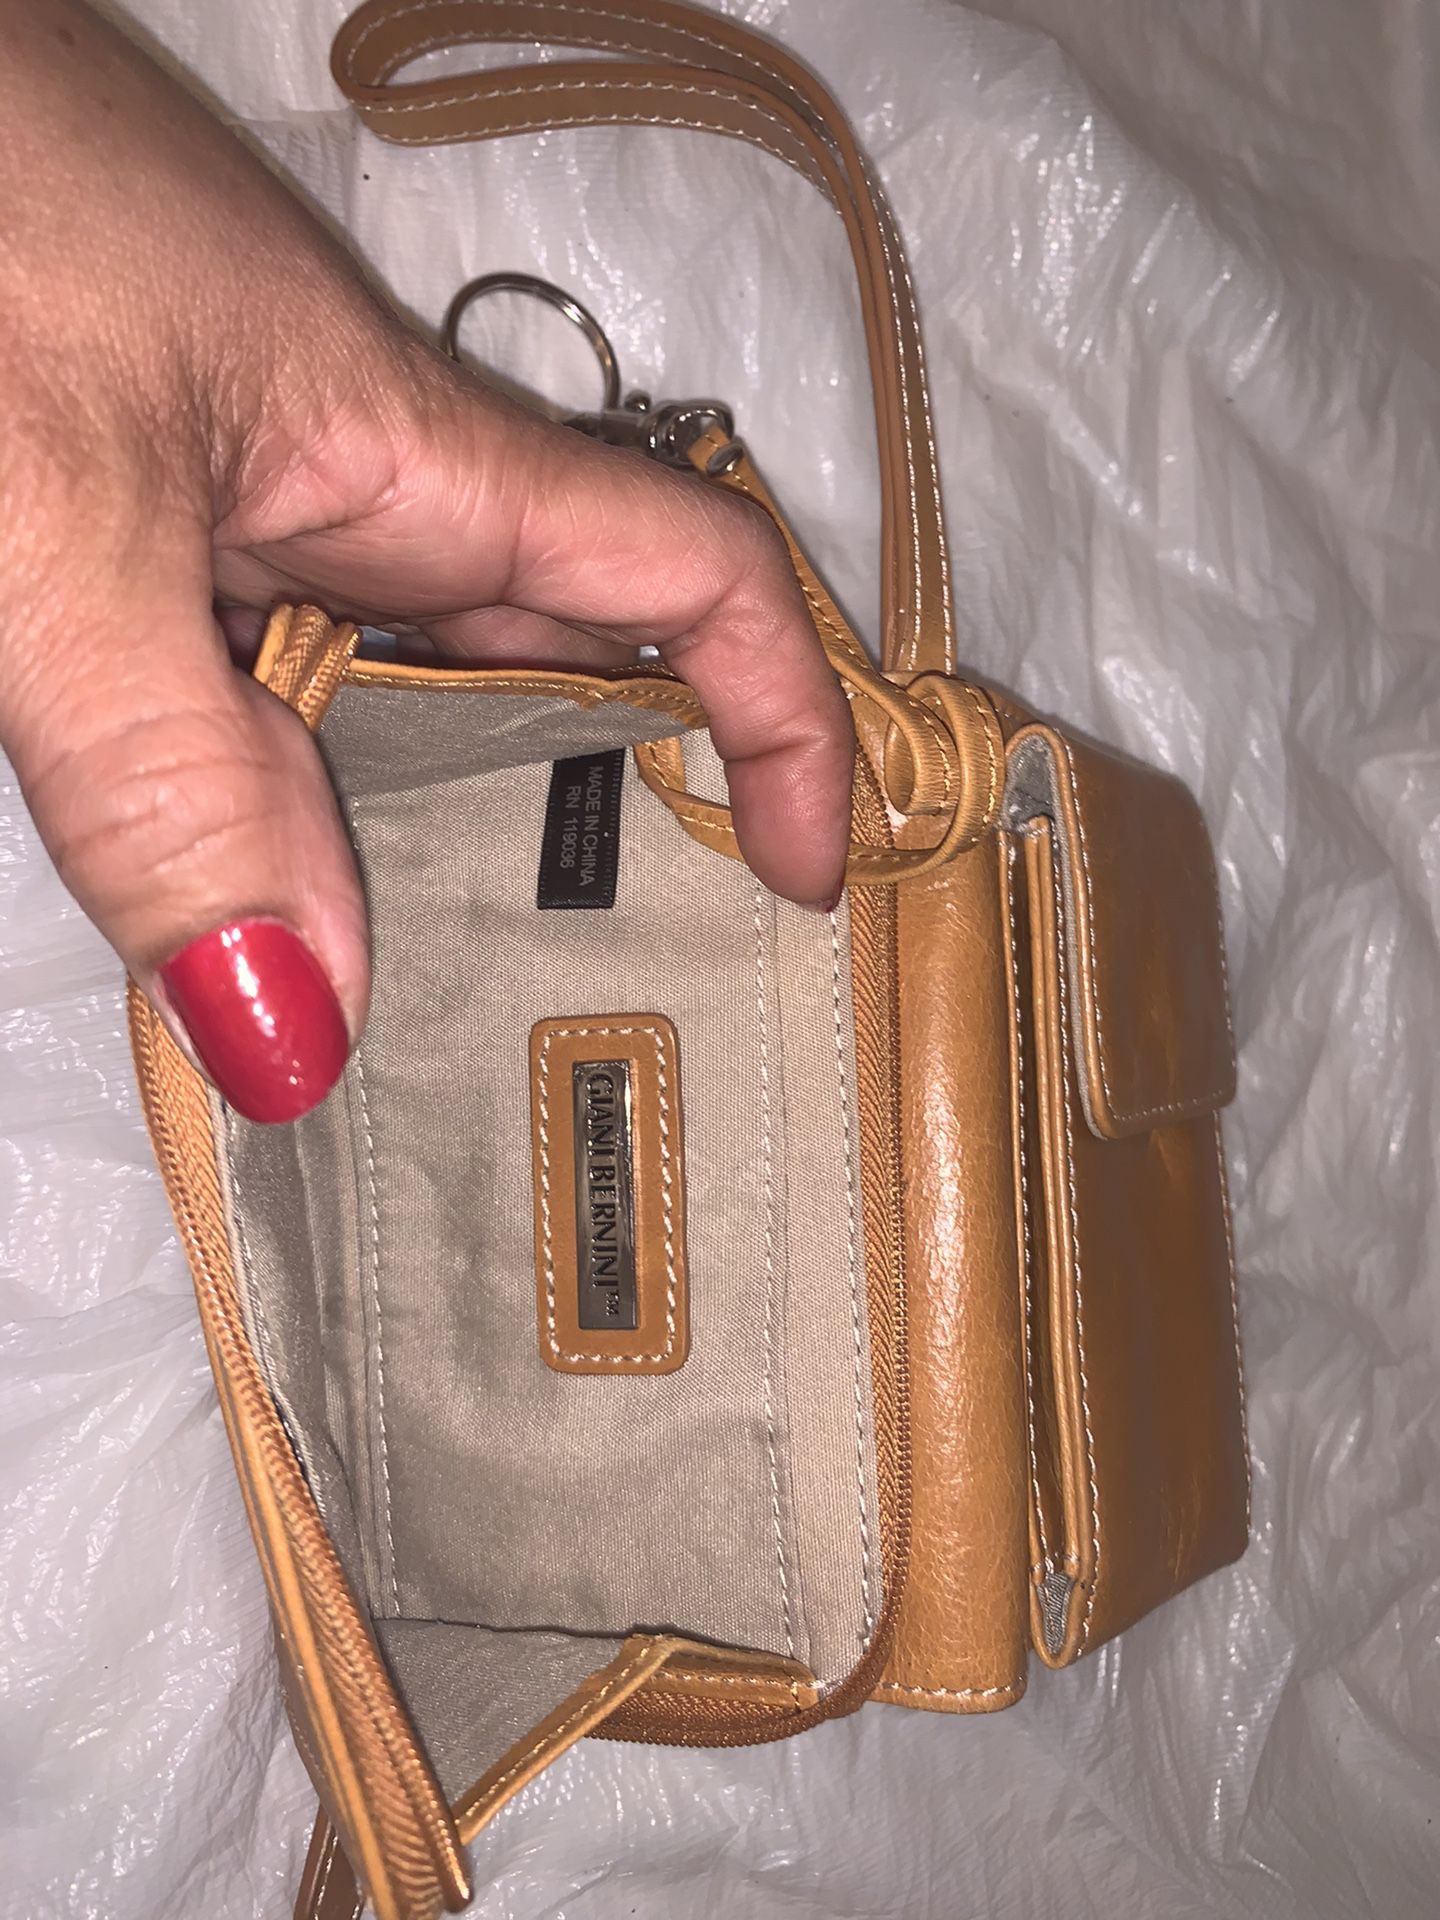 Small yellow purse in good condition never used.